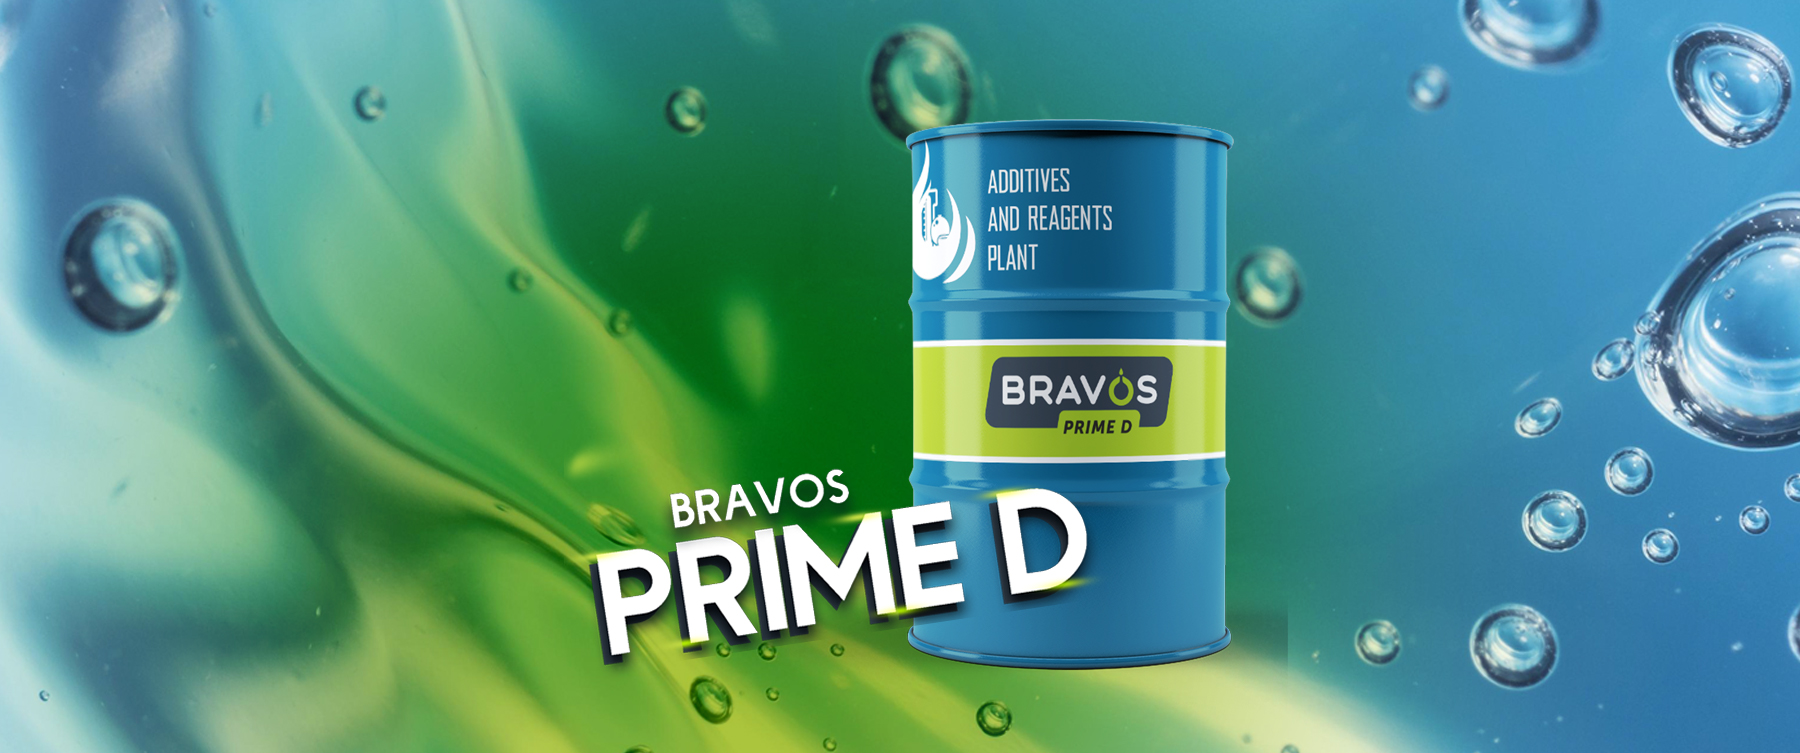 BRAVOS PRIME D IS A CLEANSING ADDITIVE